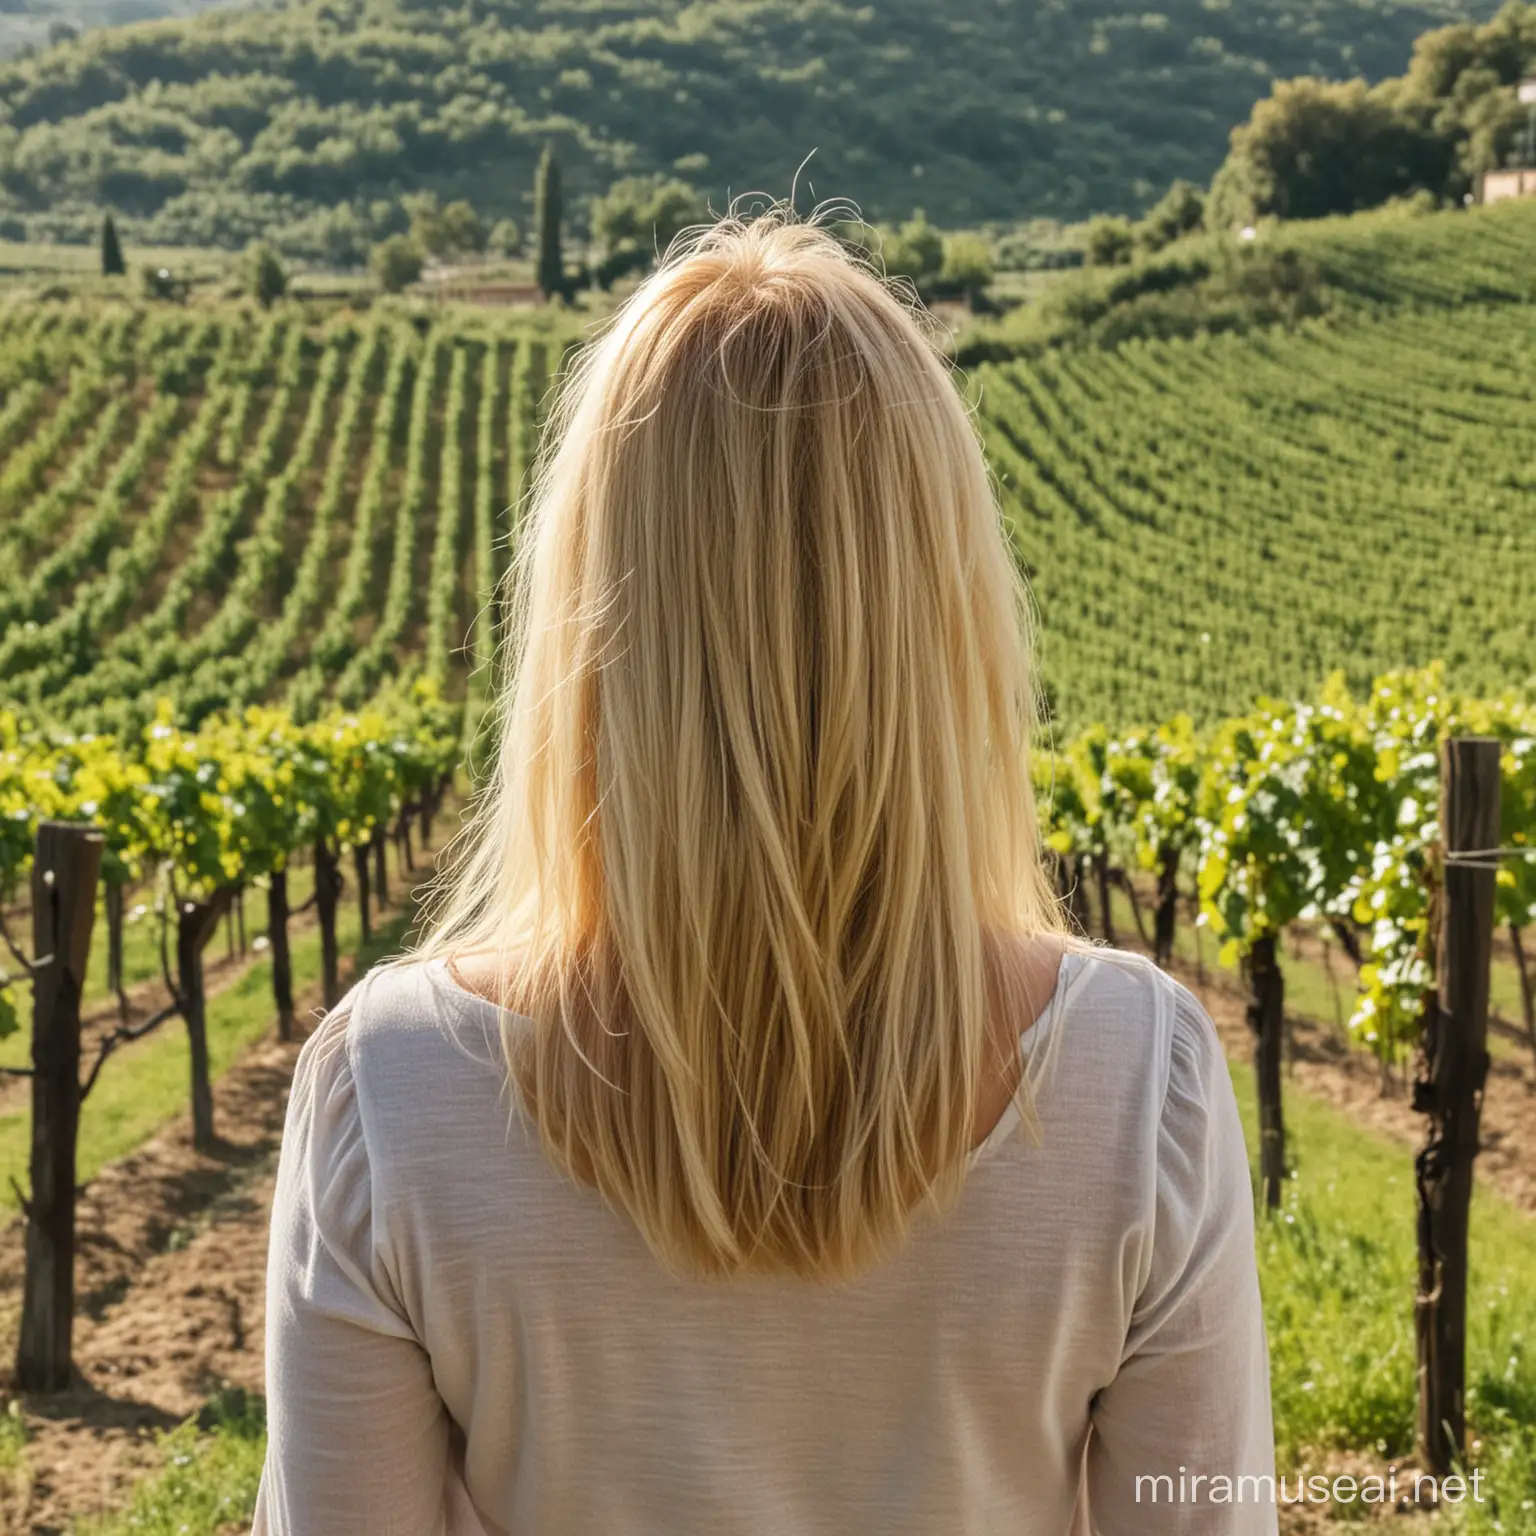 woman with blonde hair and back to the camera looking over a vineyard in Italy